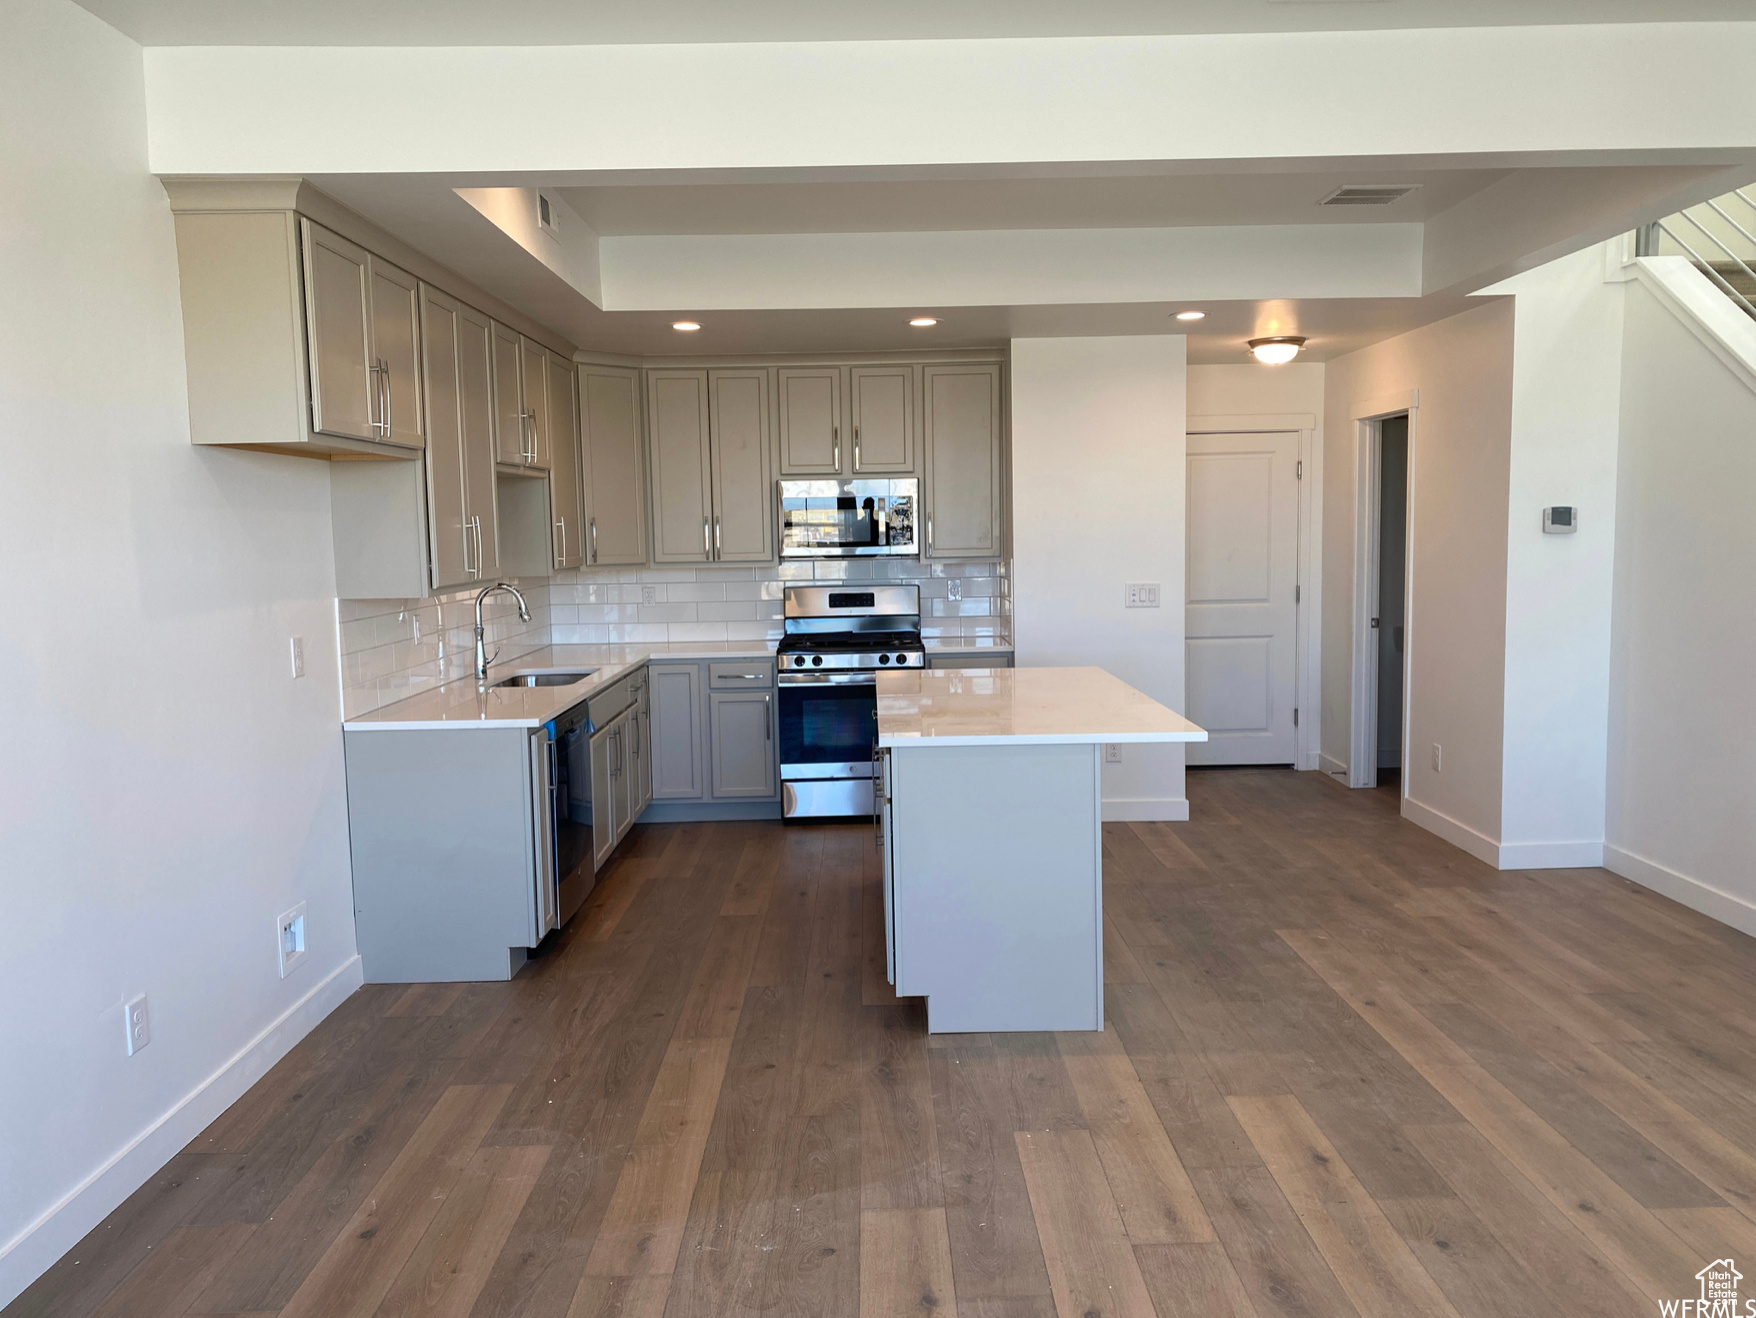 (previously built home as example) kitchen with appliances with stainless steel finishes, a center island, sink, tasteful backsplash, and dark wood-type flooring